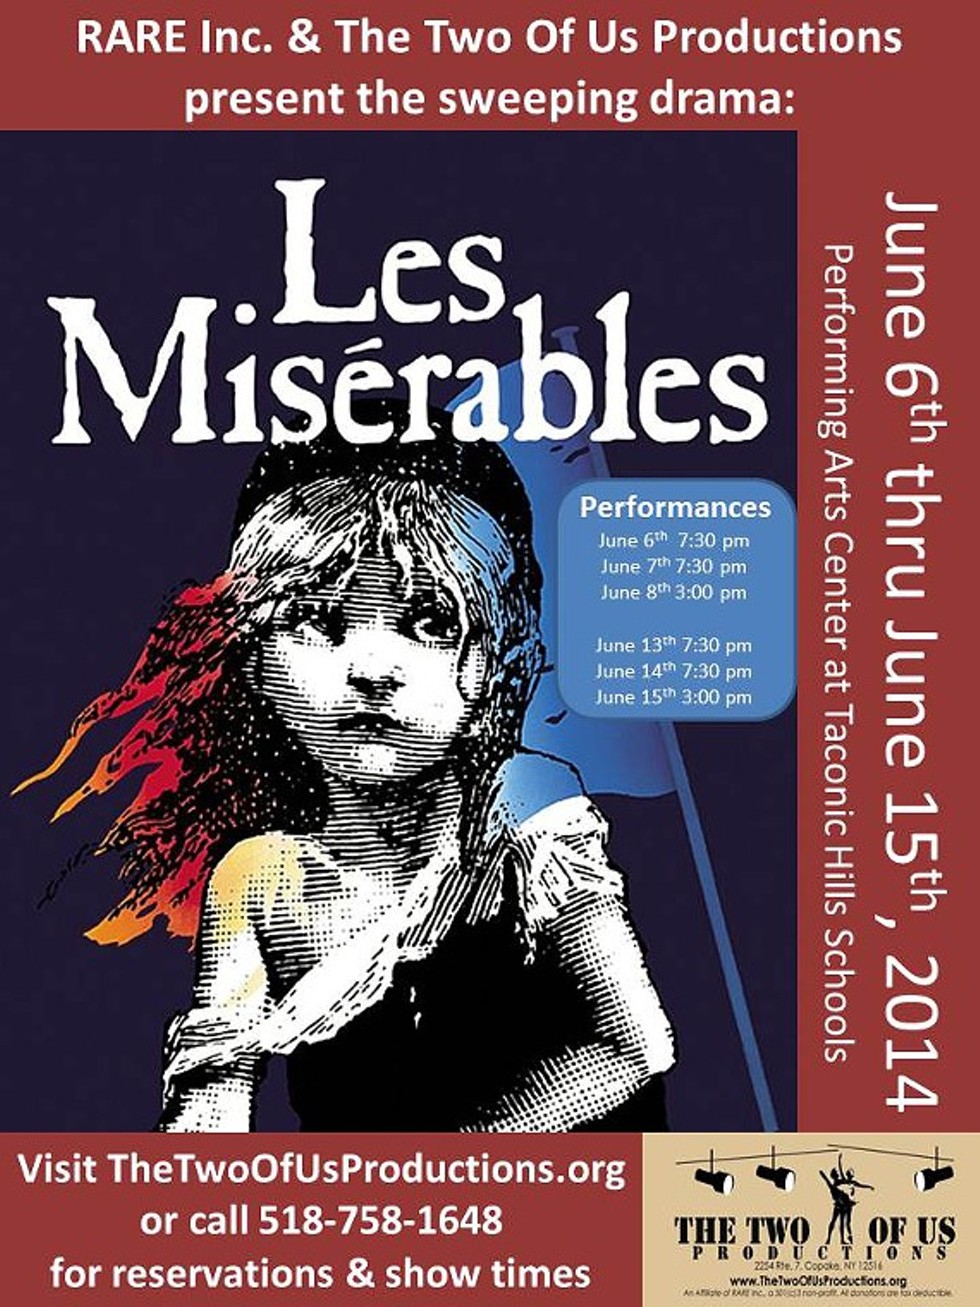 9a8d50ad_les_miserables_advertising_graphic-vertical_format.jpg